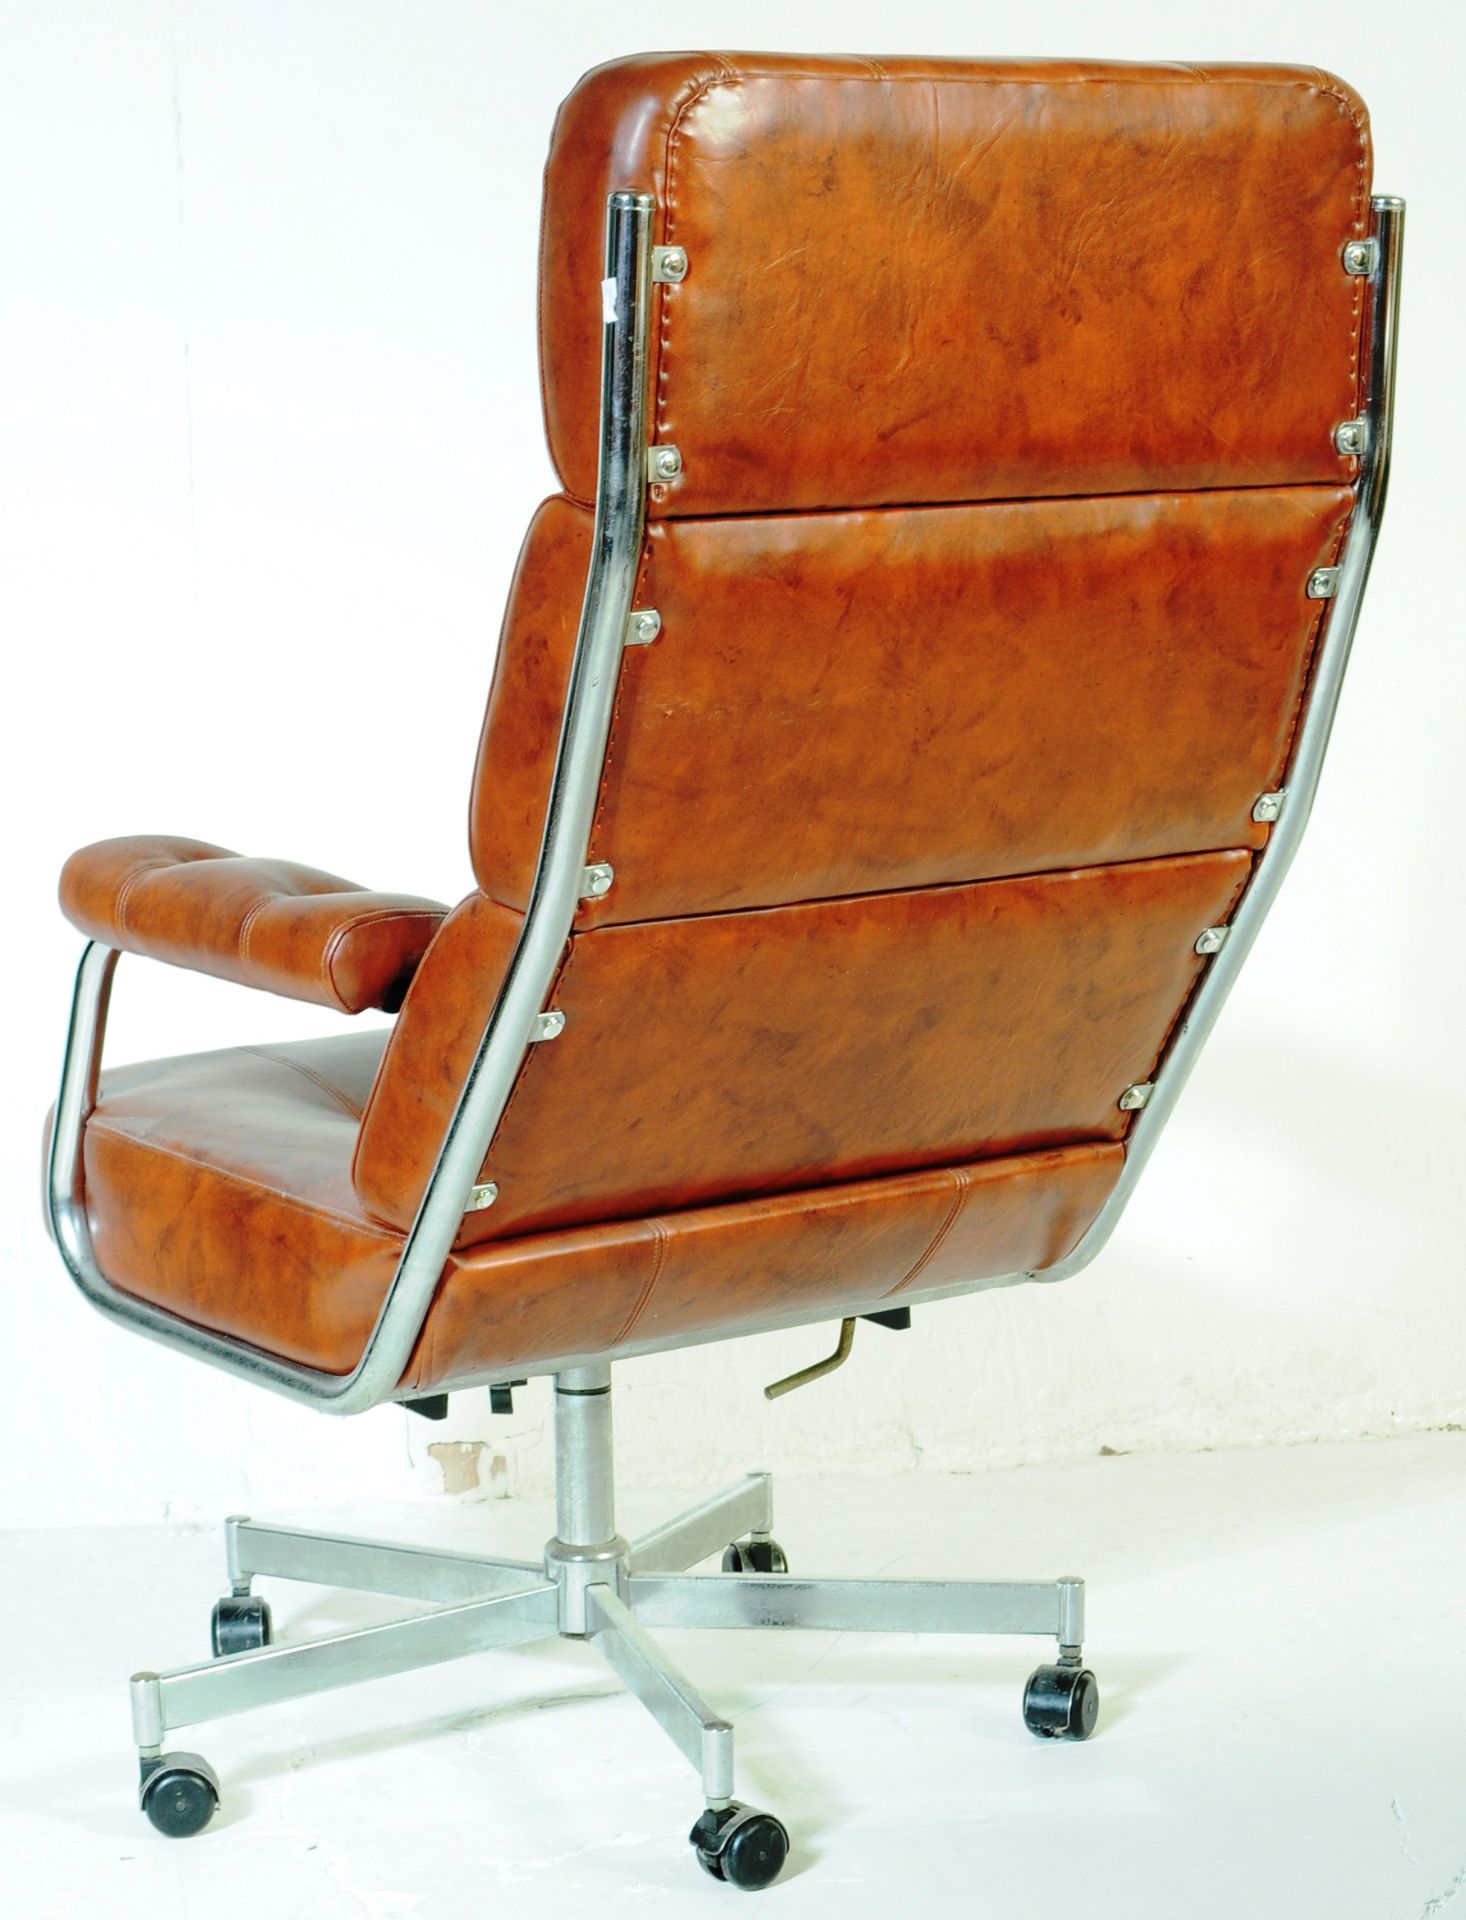 1970S TAN LEATHER & CHROME LOUNGE SWIVEL CHAIR - EKORNES STYLE - Image 3 of 5